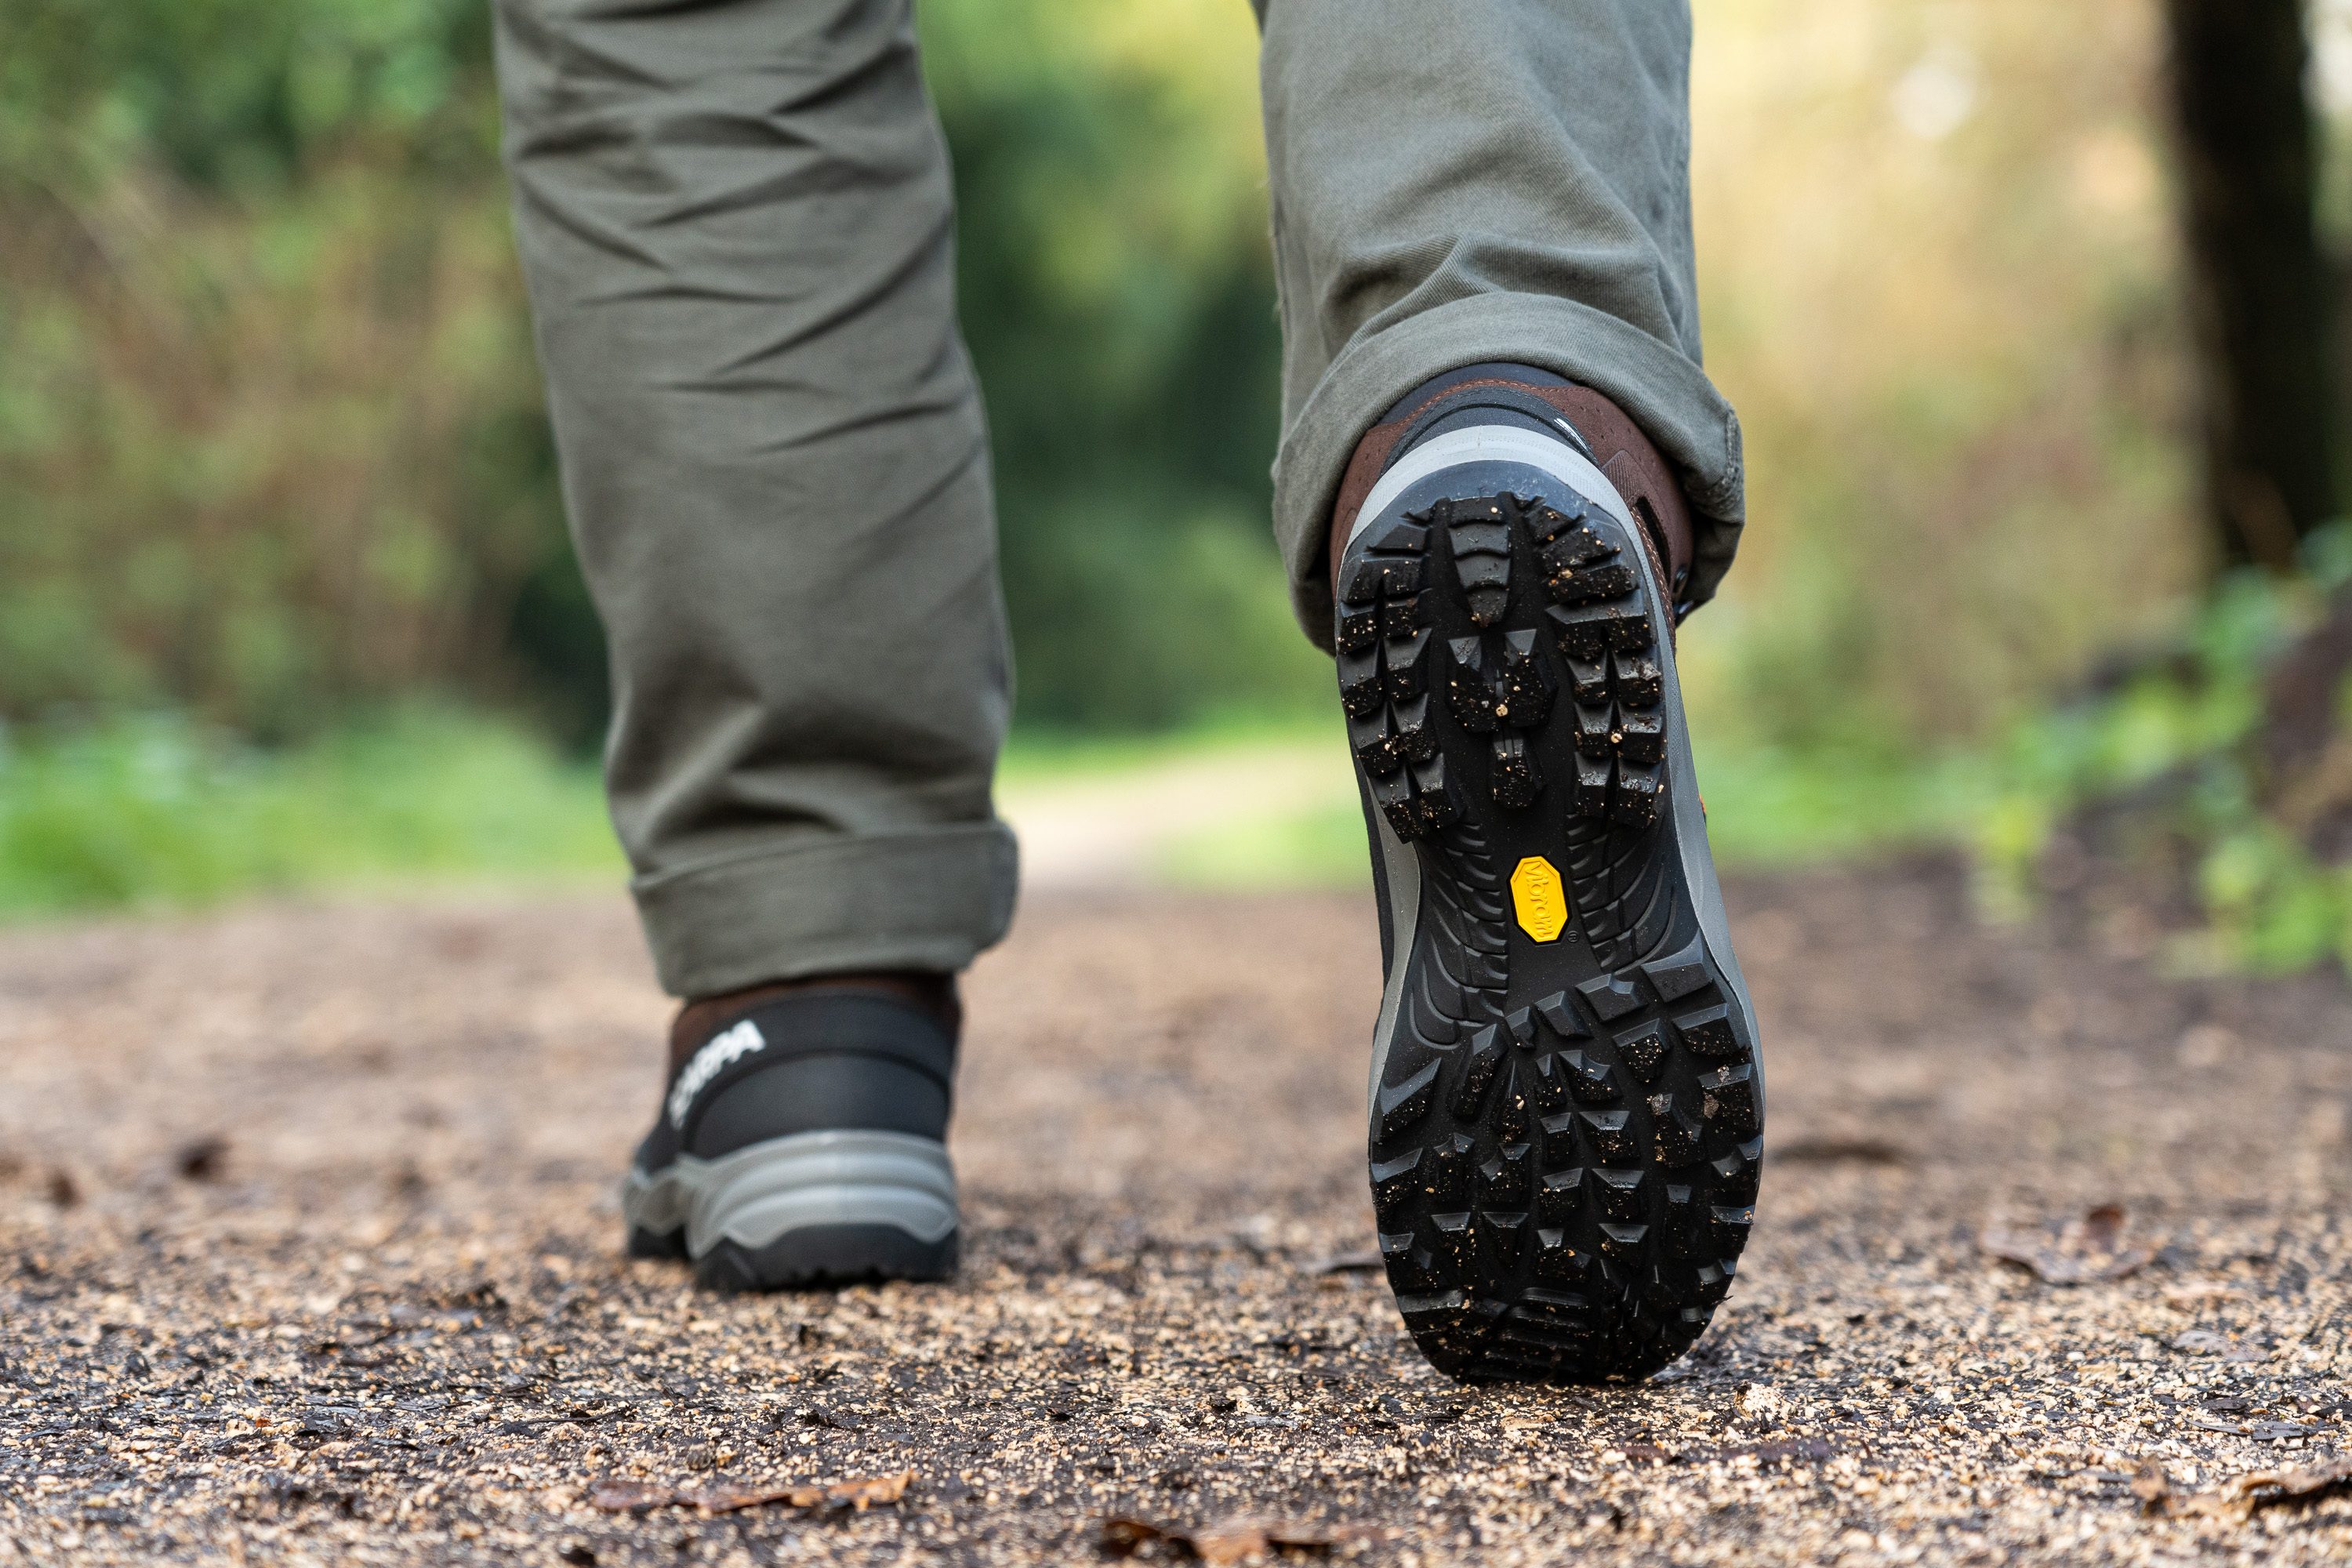 We recommend the Boreas GTX as an excellent choice for Lug depth